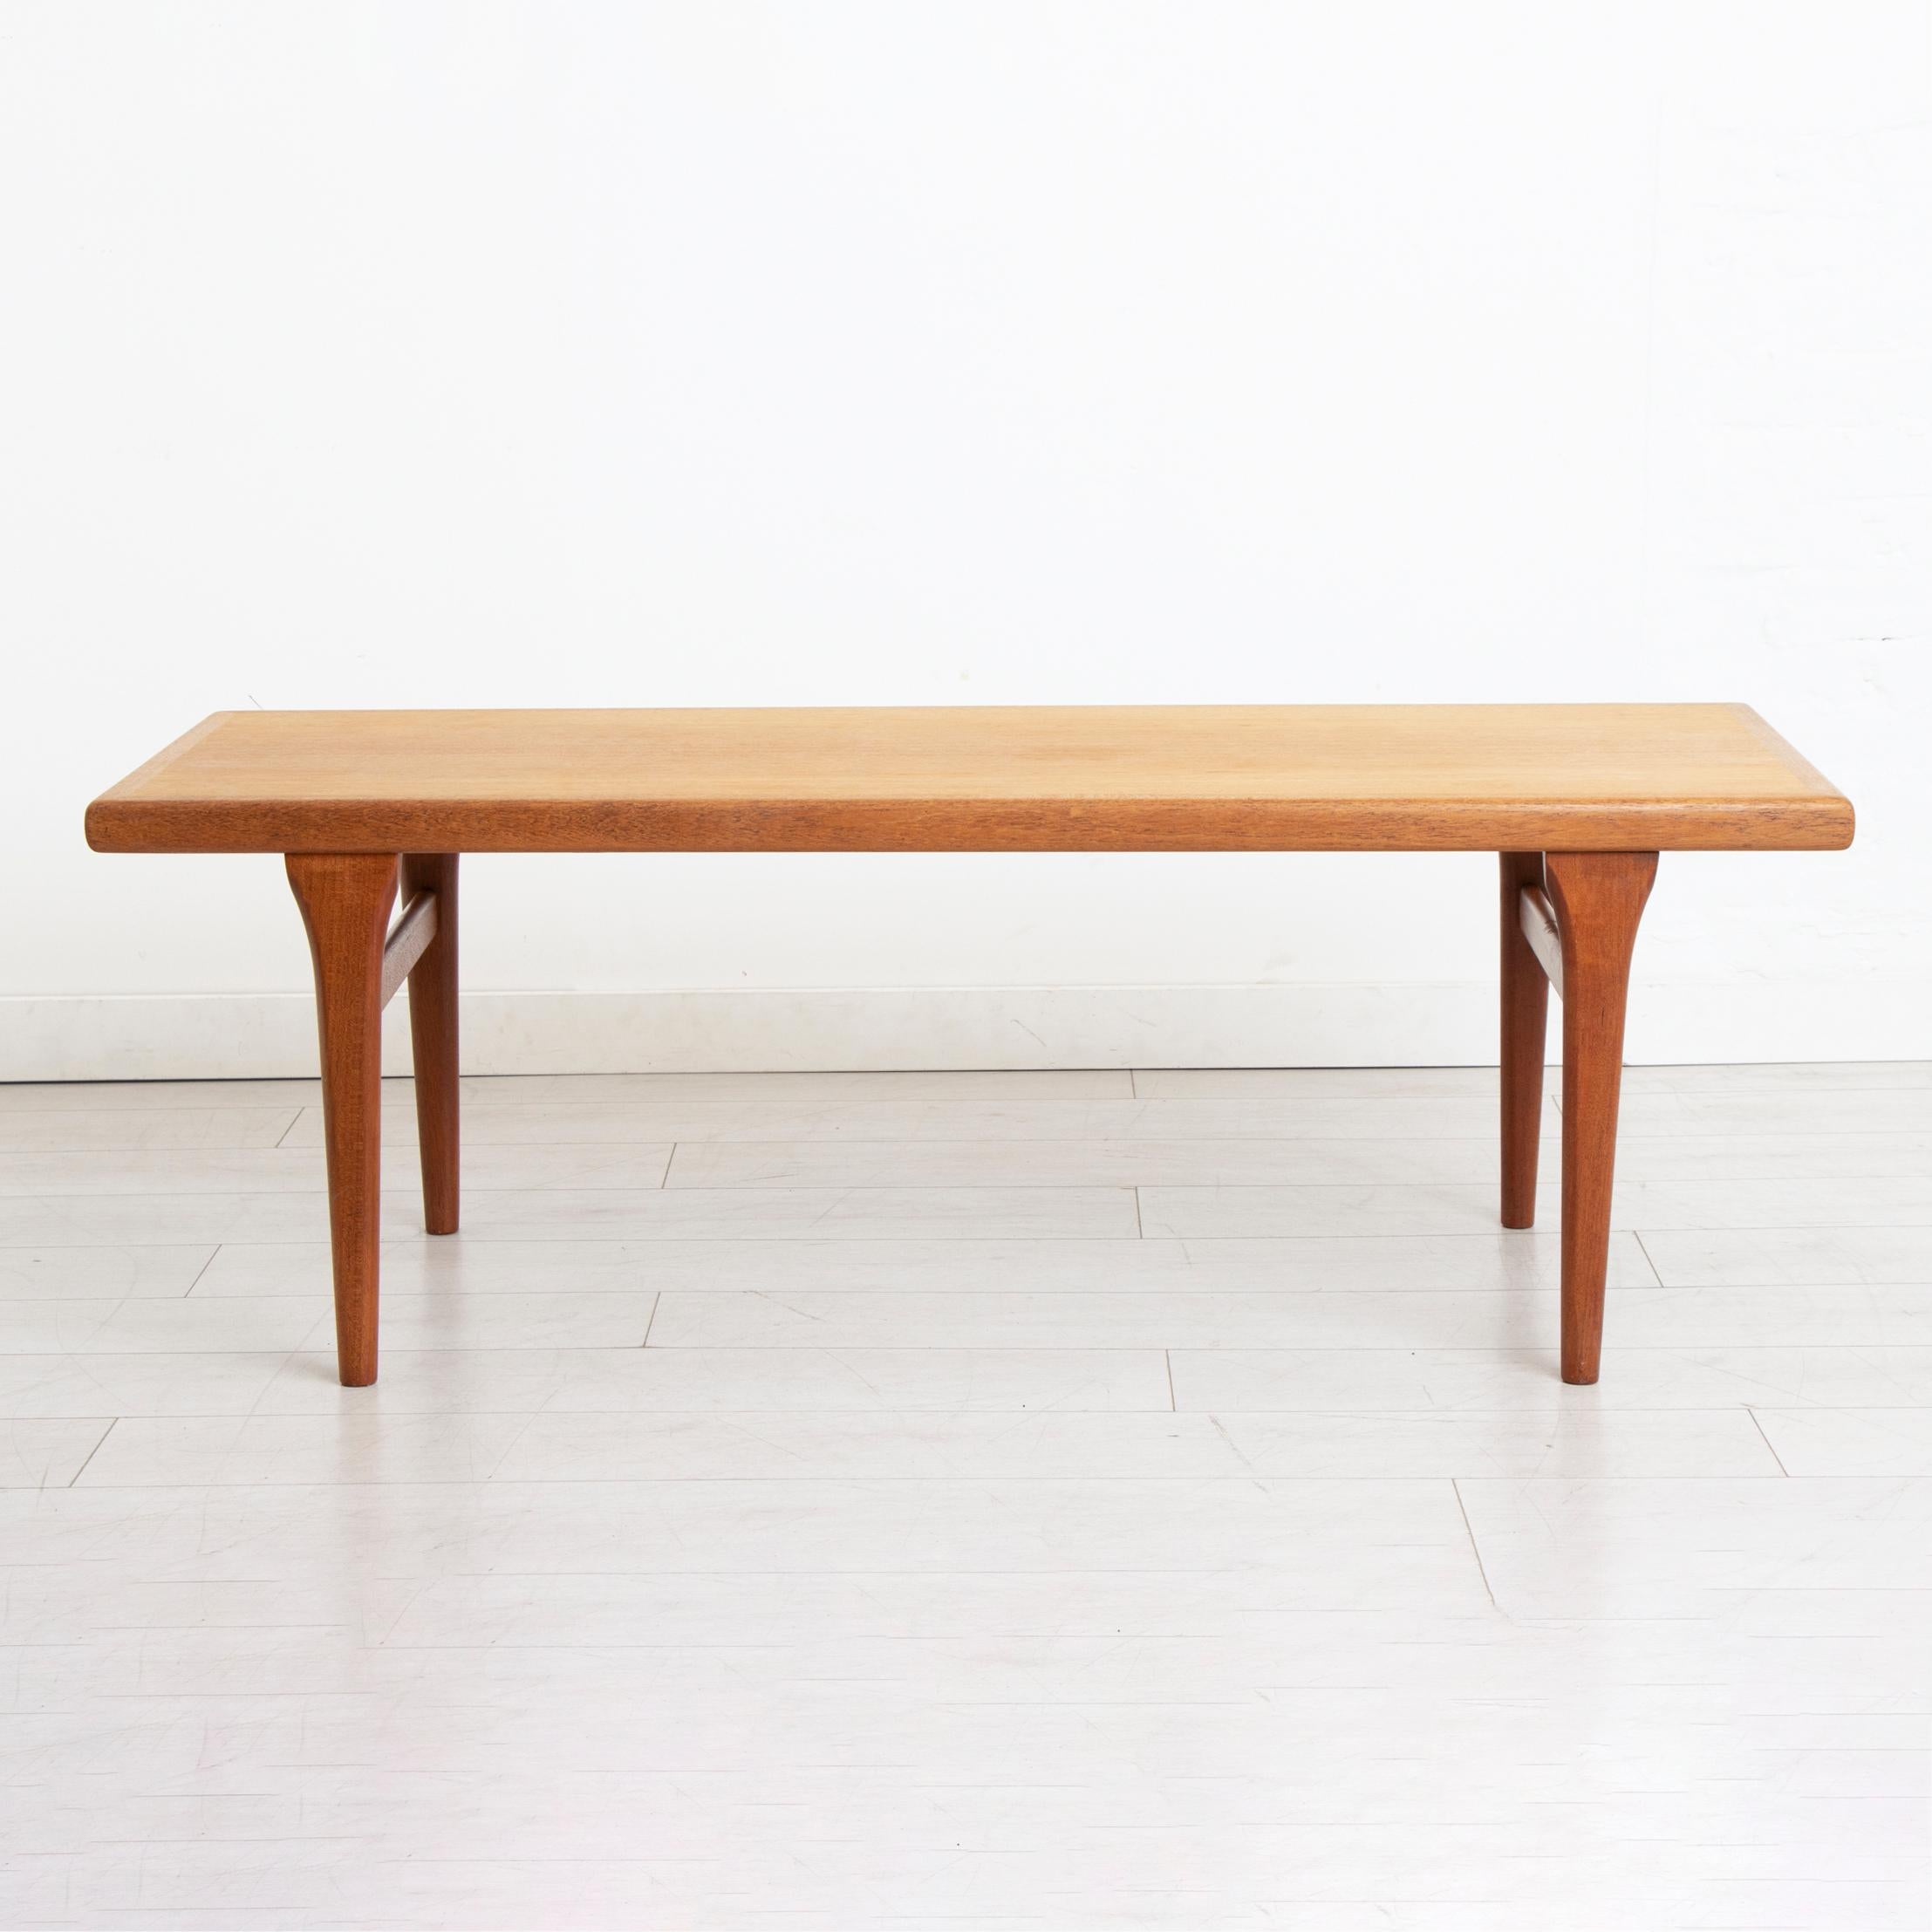 A large Danish mid-century teak coffee table originally purchased from Heals, London in 1965. Excellent restored condition.